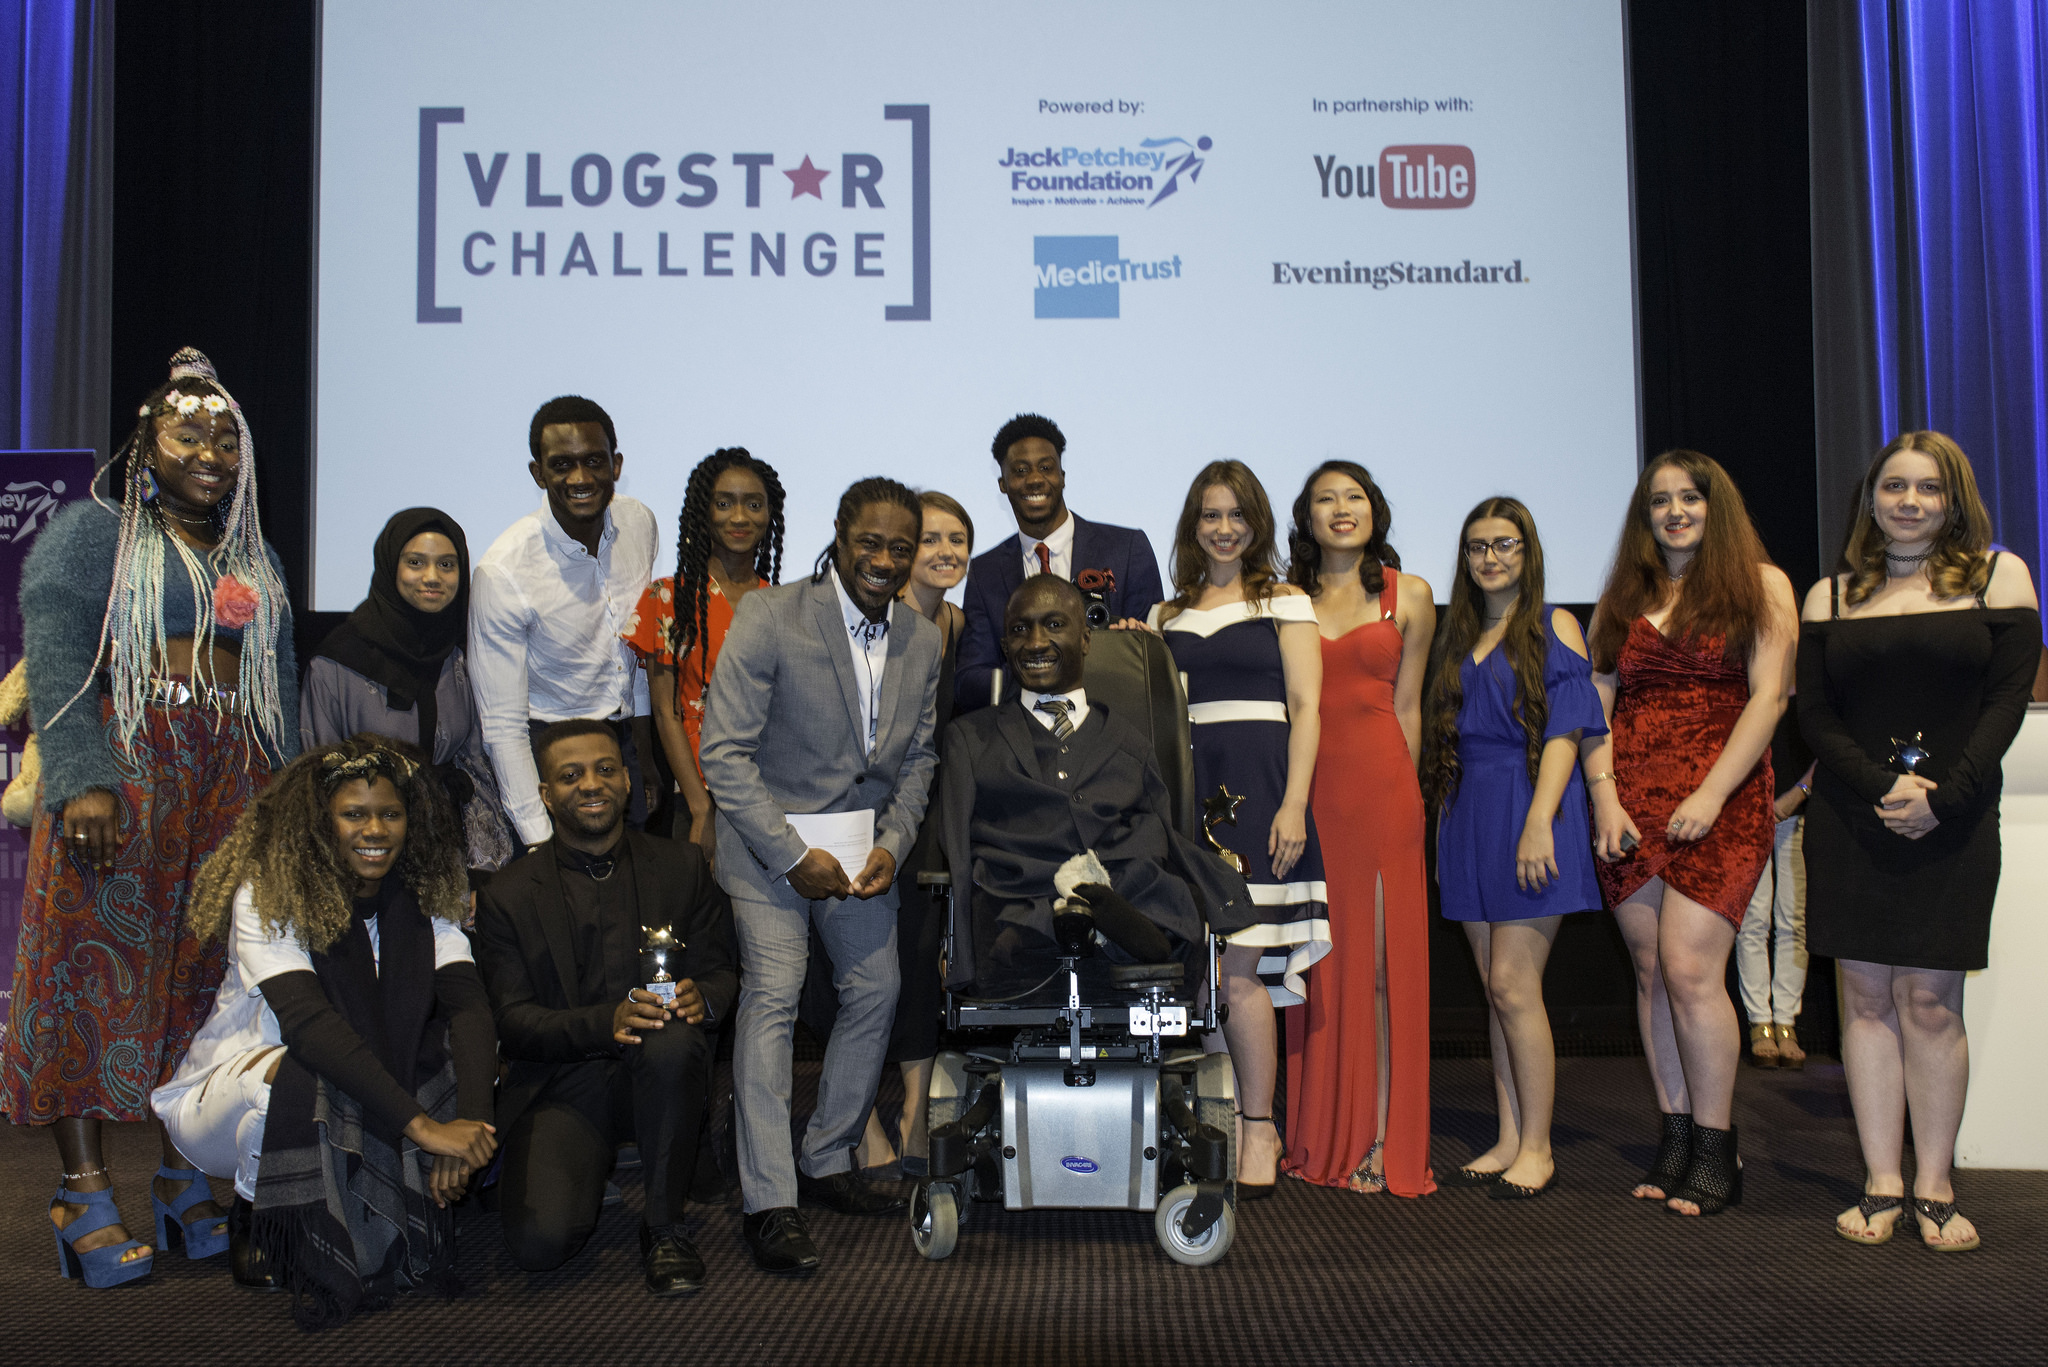 2017 Vlogstar Challenge finalists on the stage at BAFTA